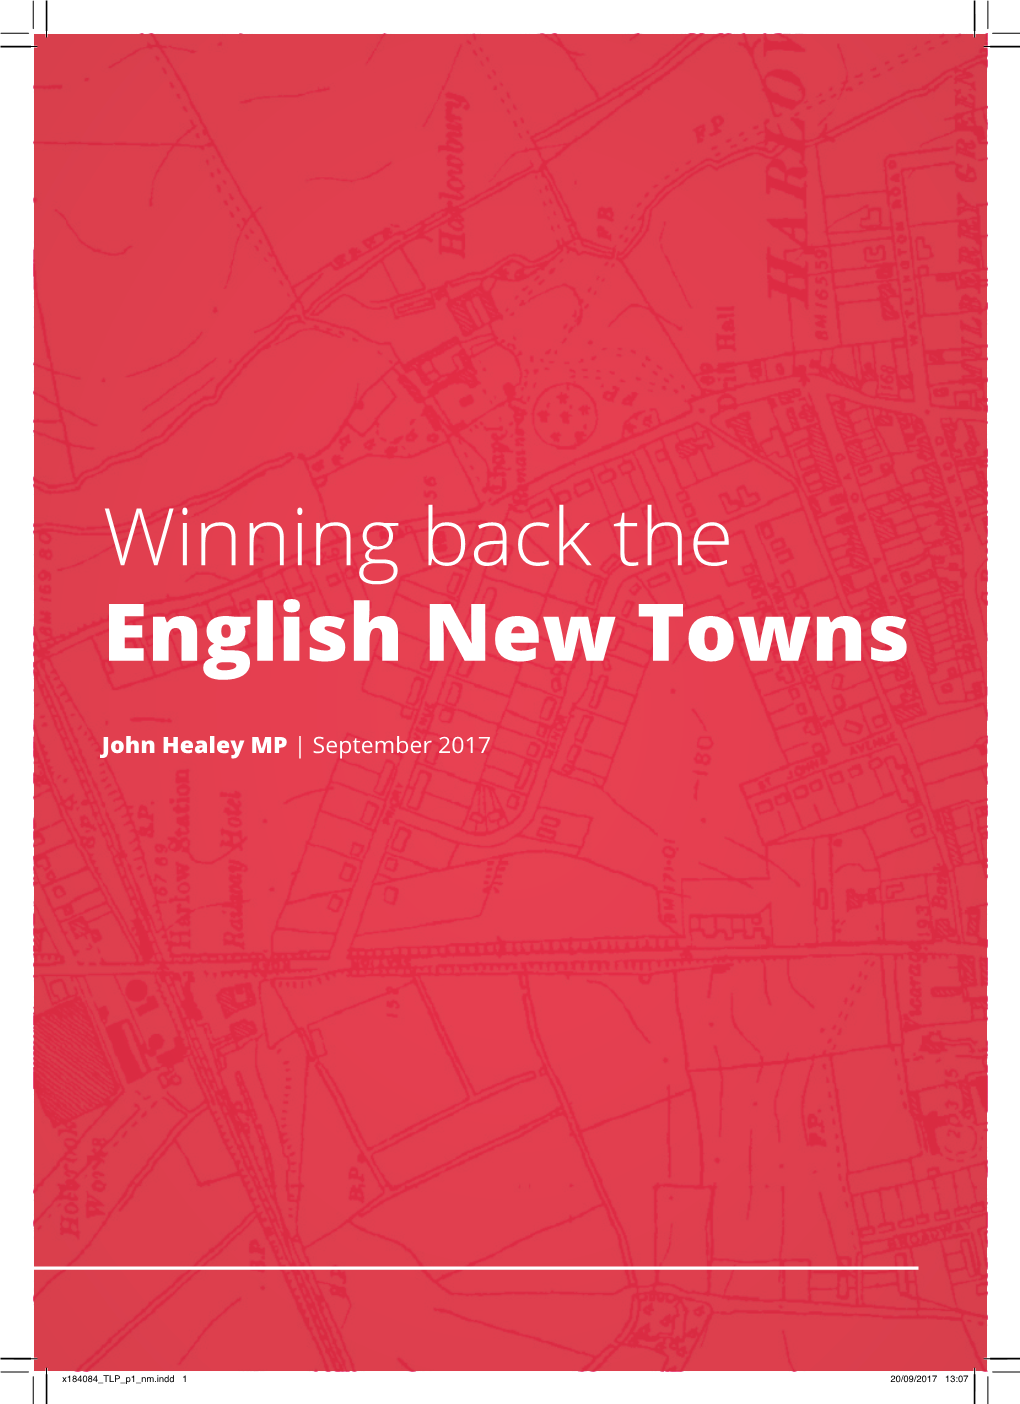 Winning Back the English New Towns